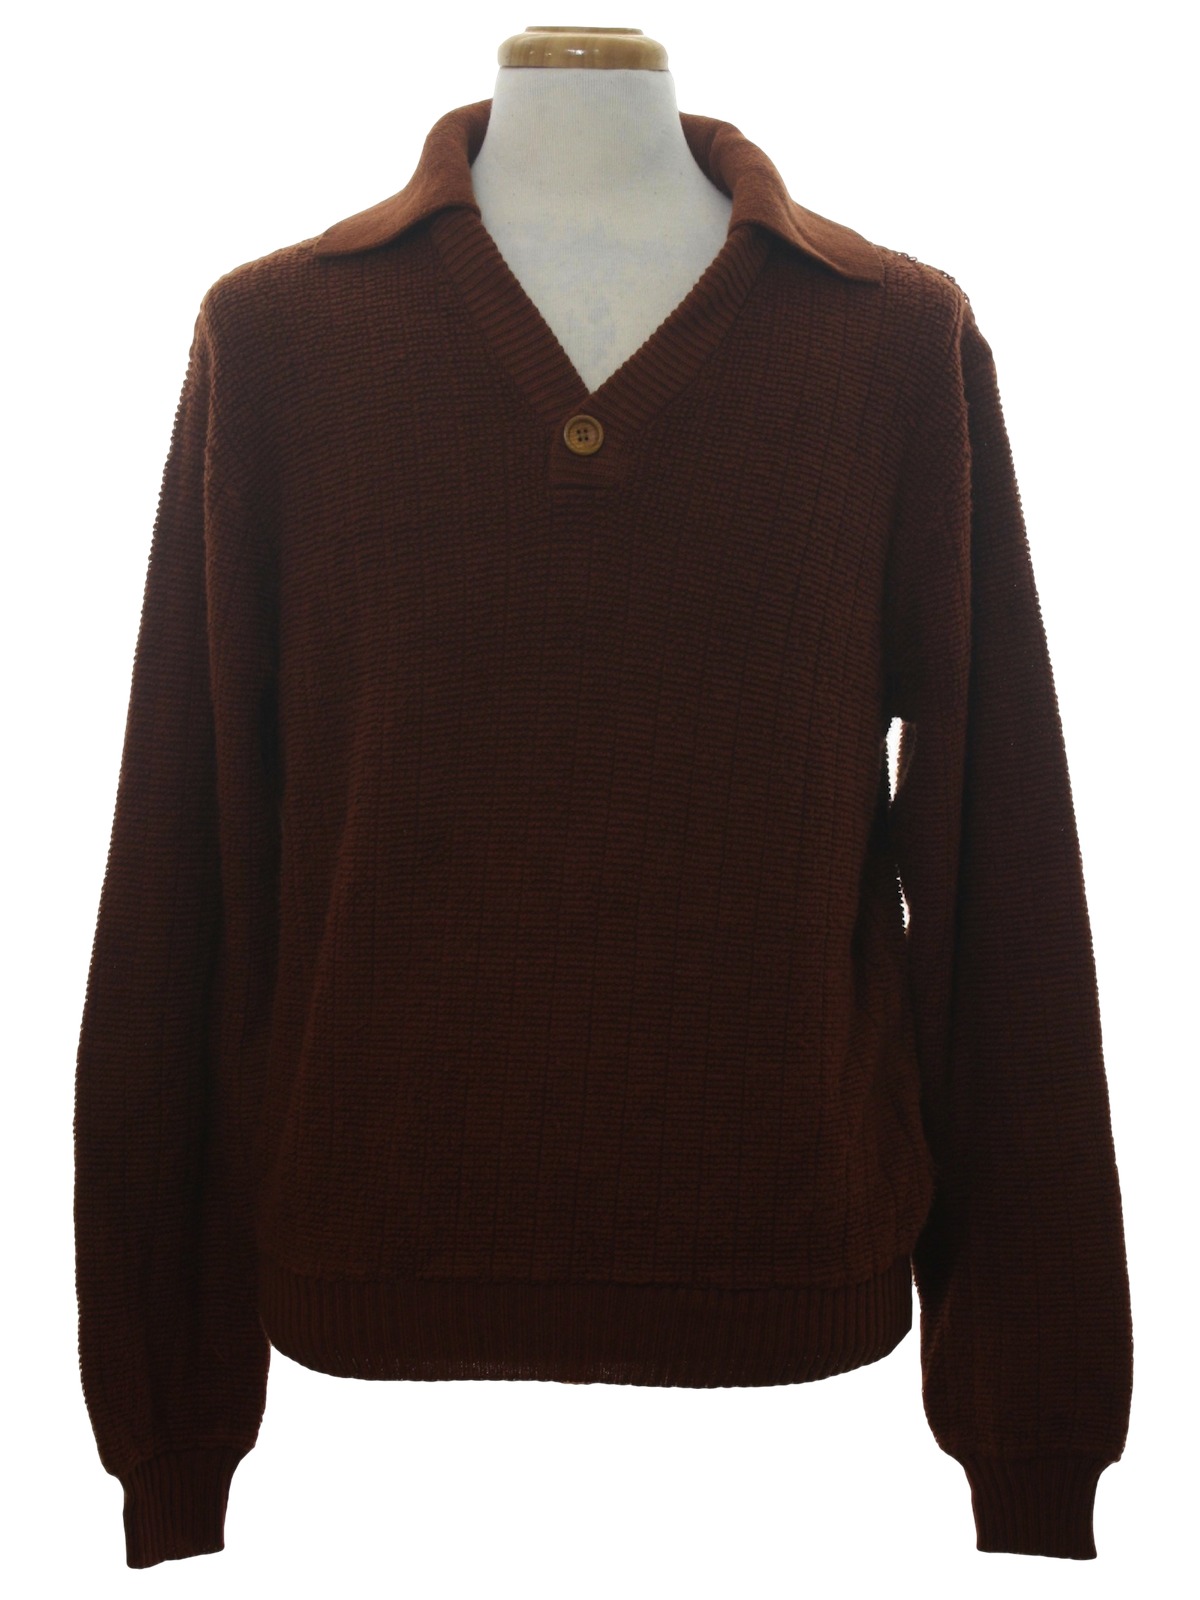 Vintage 1970's Sweater: 70s -JCPenney- Mens brown background acrylic ...